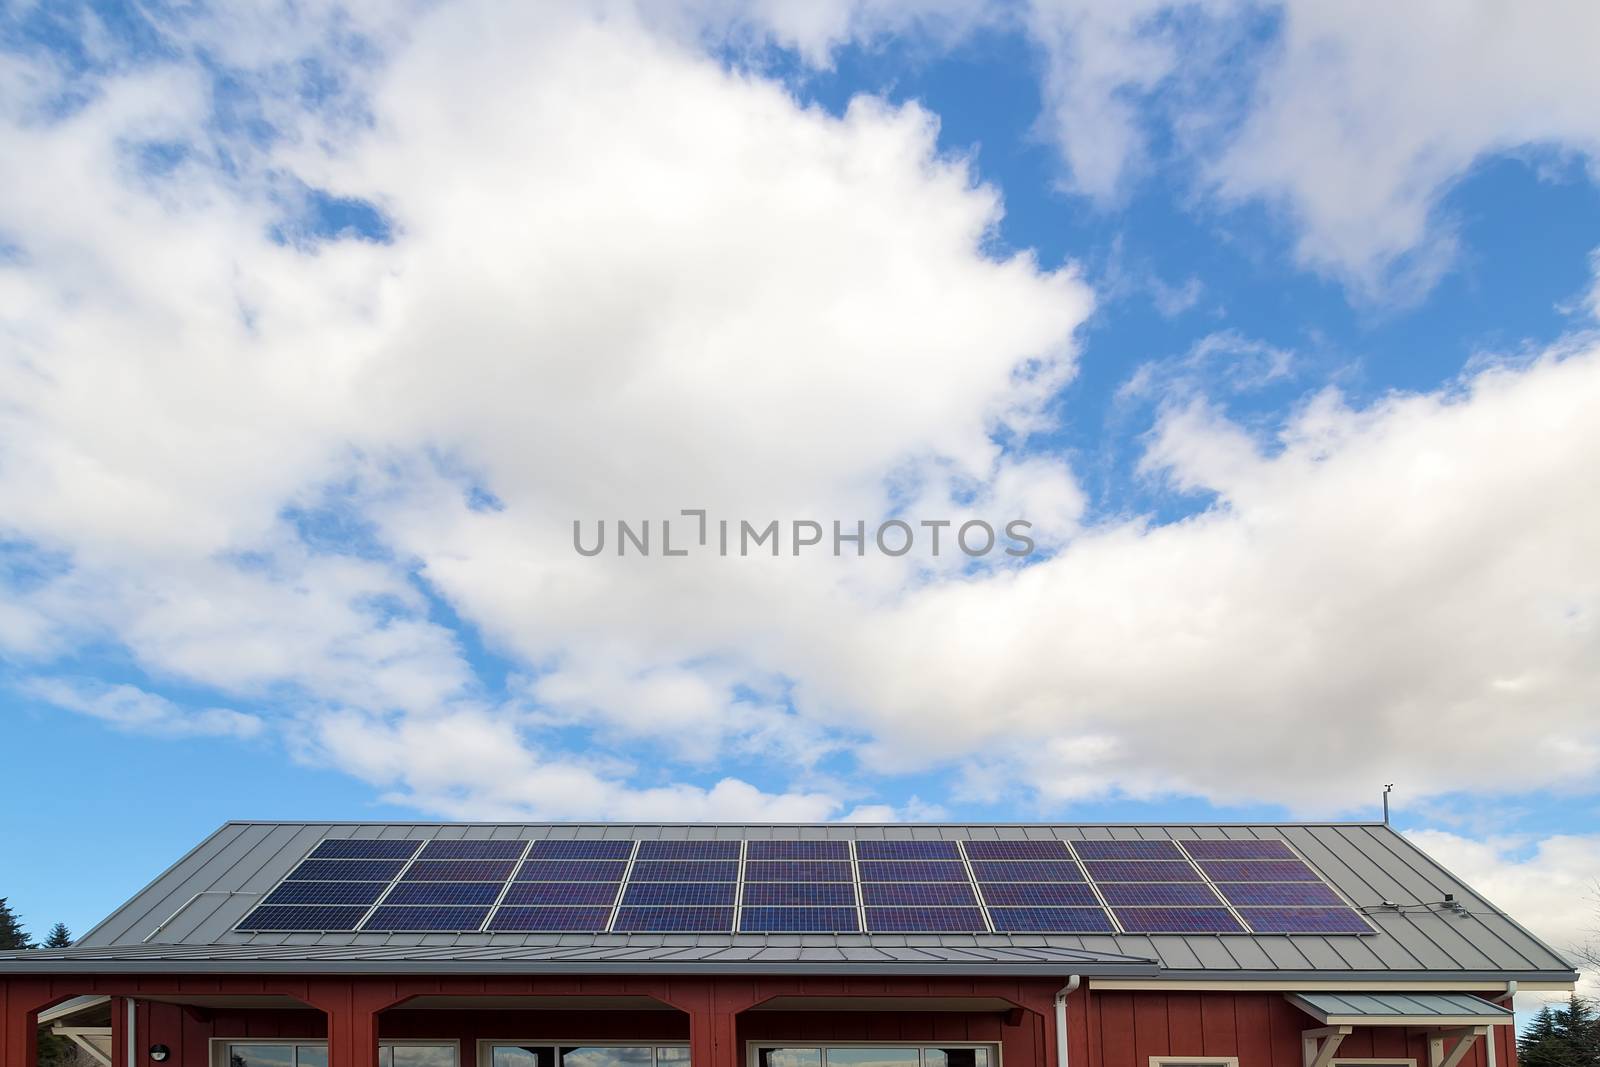 Solar Panels for generating eco-friendly electricity on the rooftop of house against white clouds and blue sky